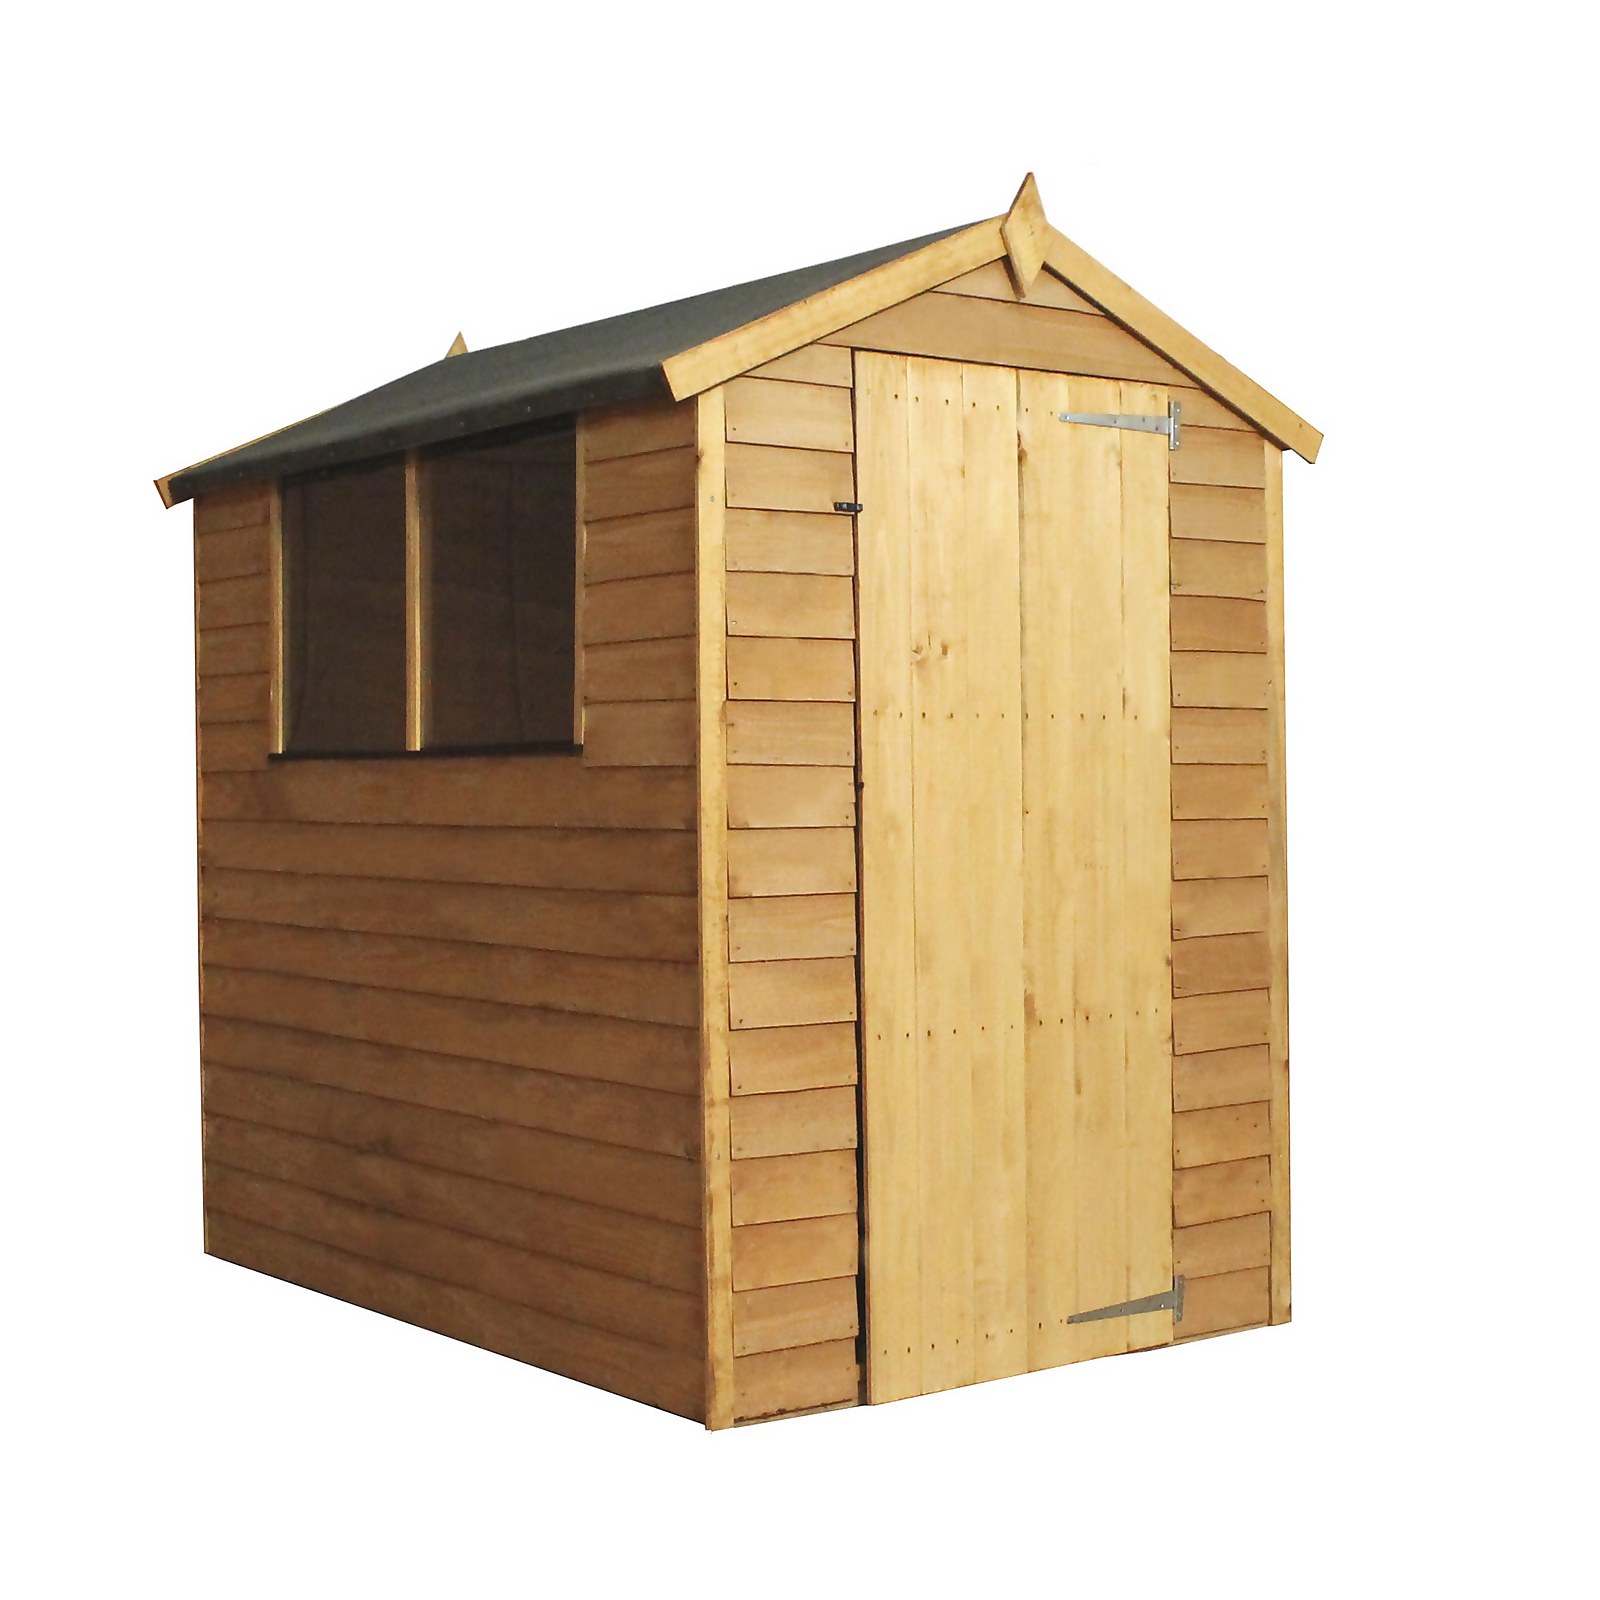 Mercia 6x4ft Overlap Apex Shed